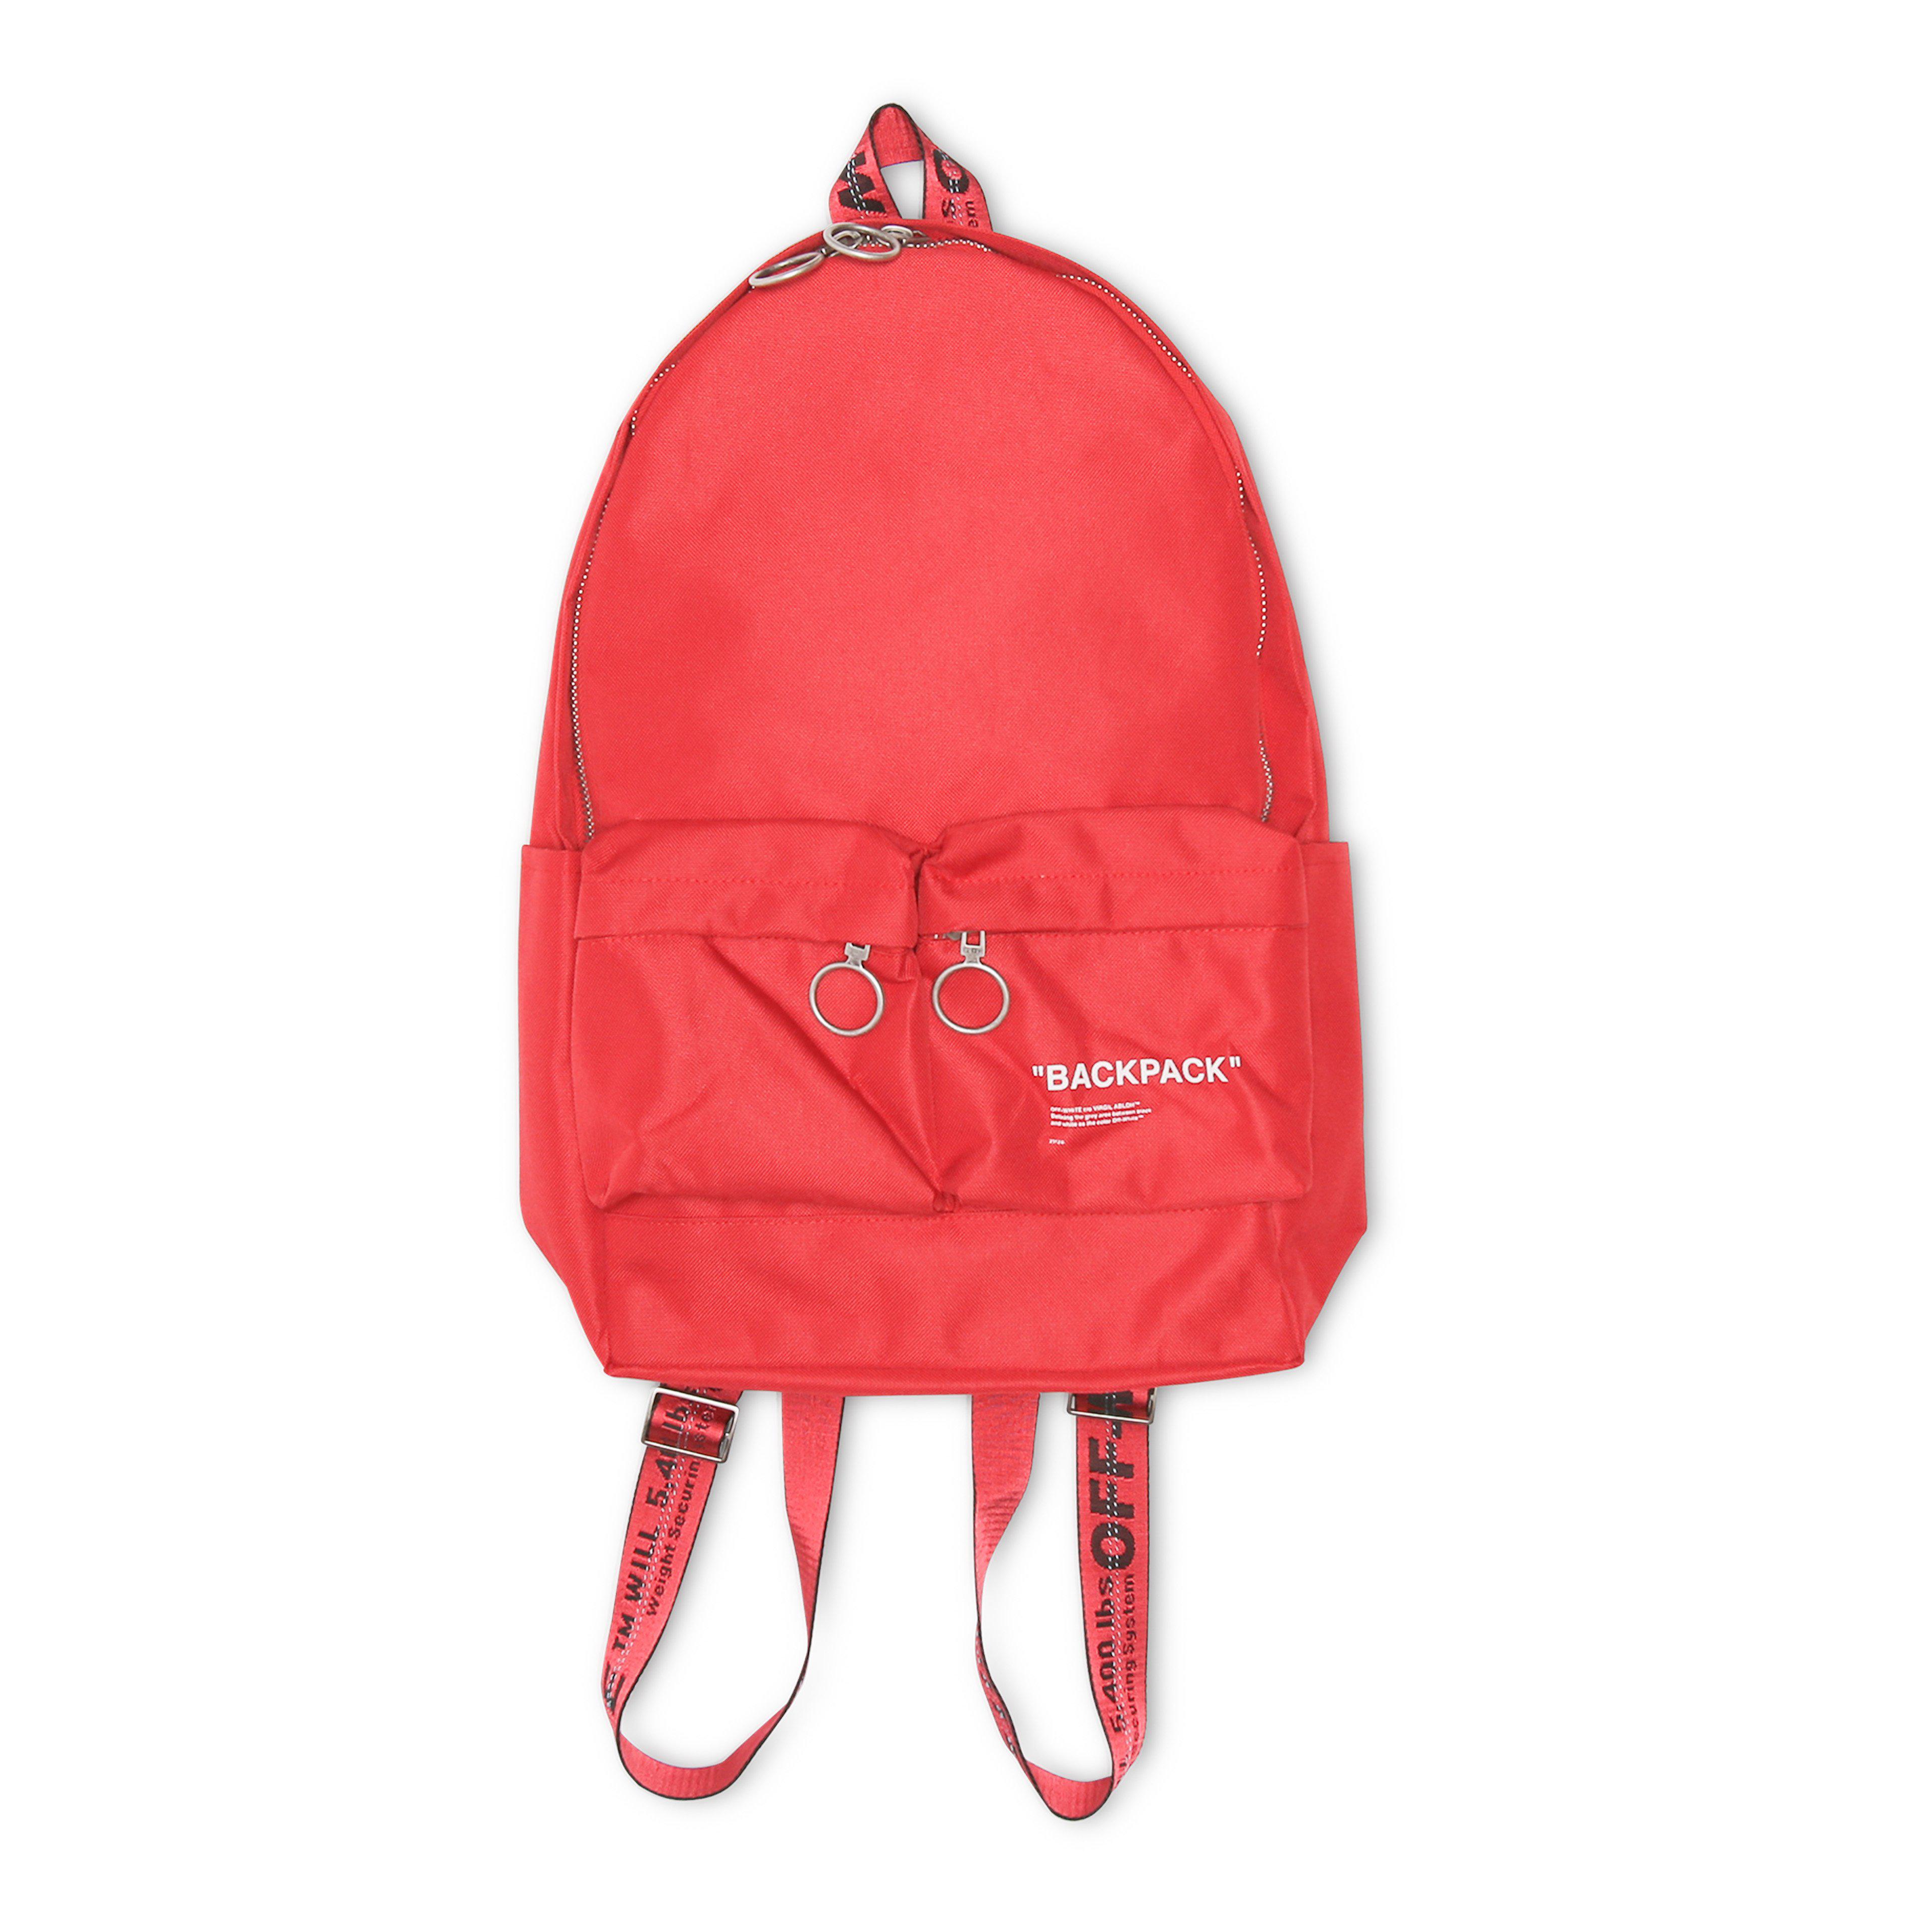 Off-White c/o Virgil Abloh Quote Backpack in Red for Men - Lyst